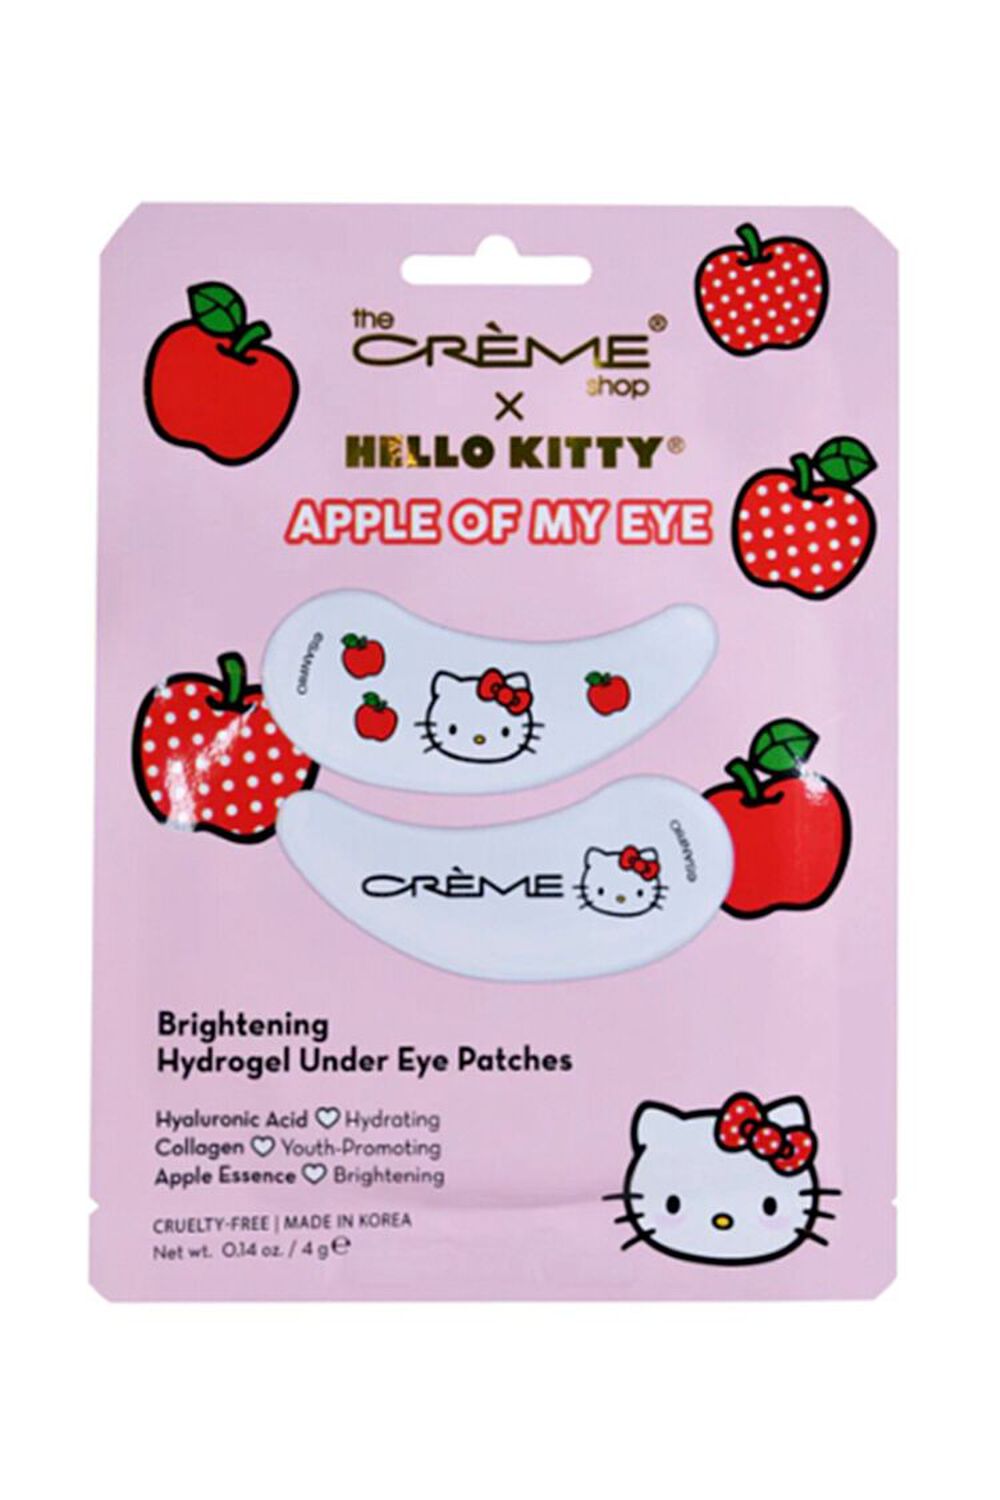 The Crème Shop x Hello Kitty Apple of My Eye Brightening Hydrogel Under Eye Patches